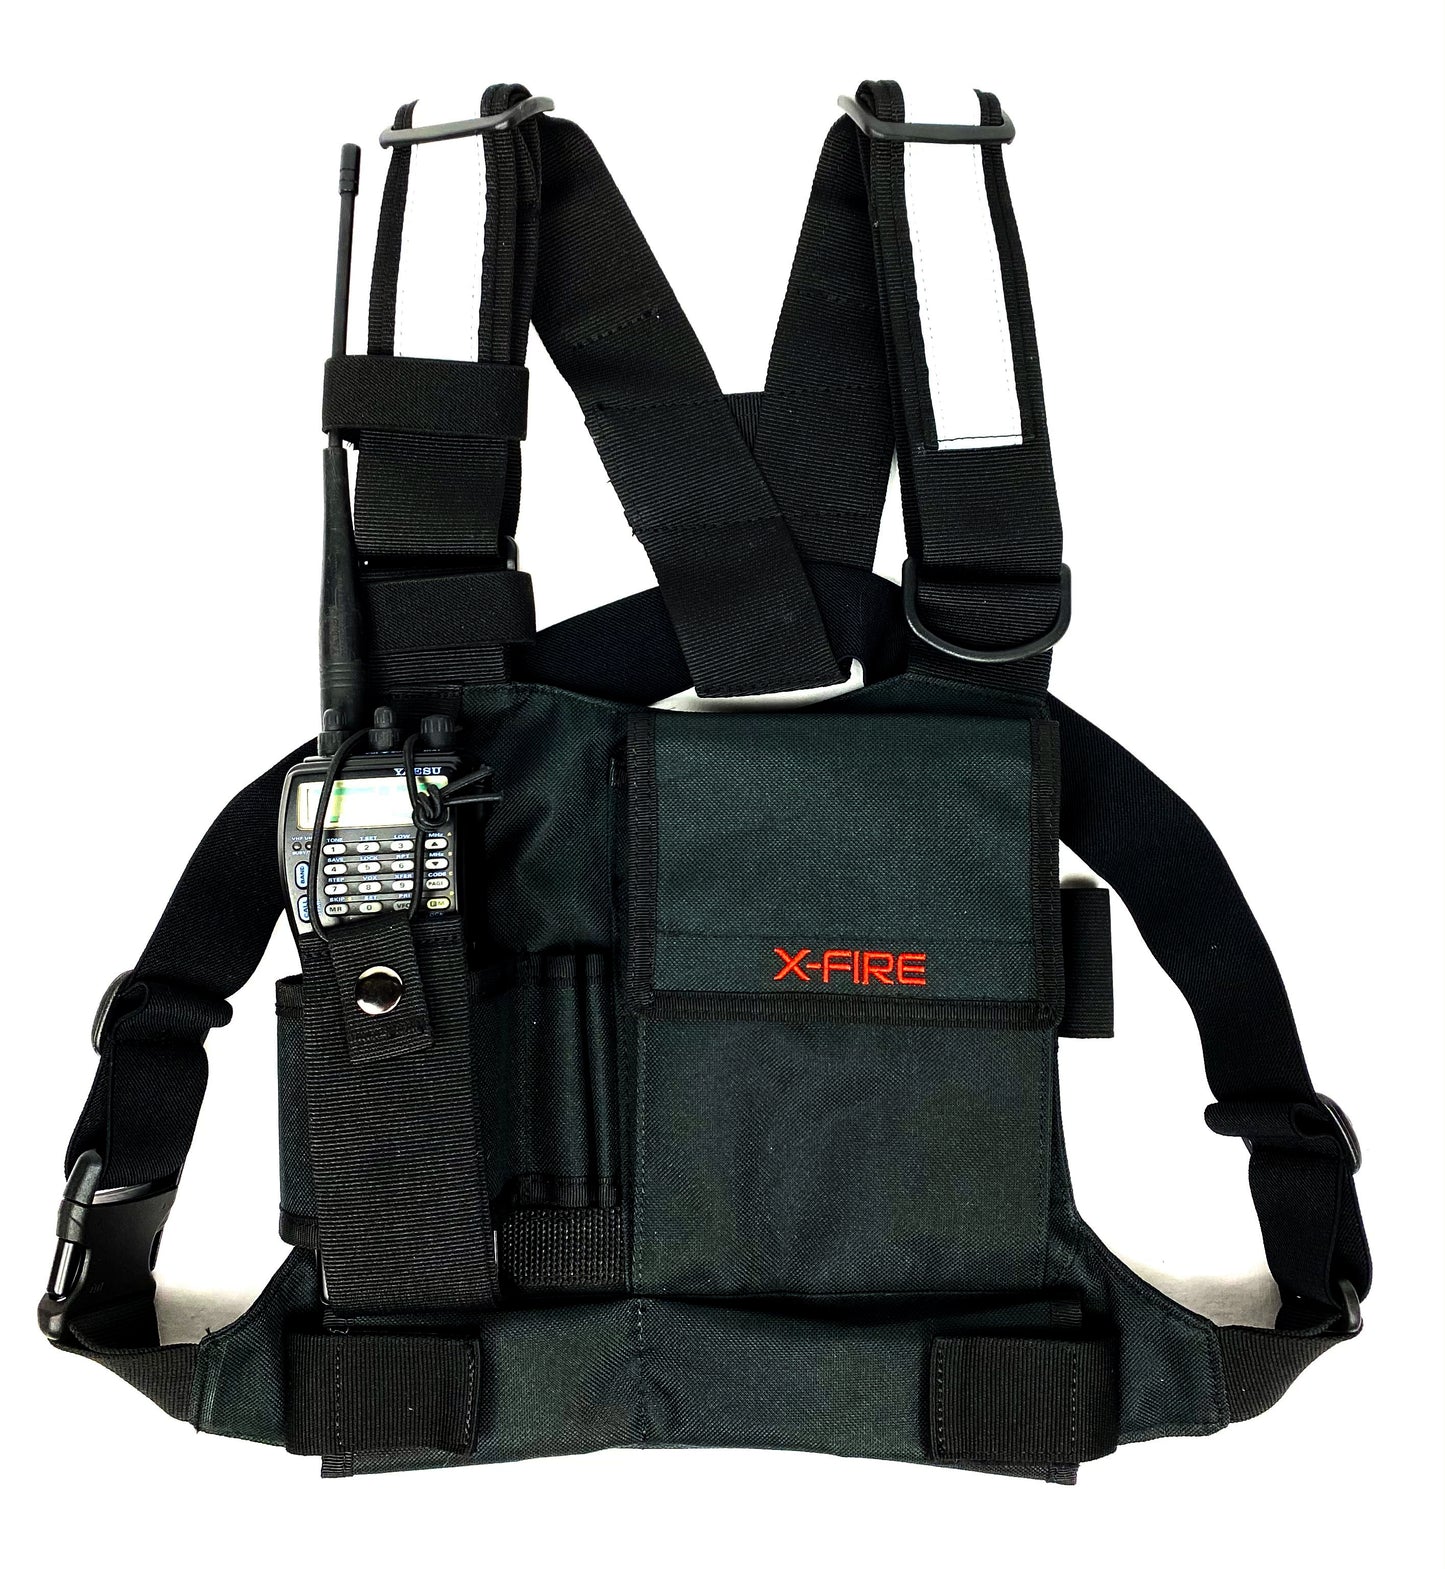 X-FIRE® Single Radio Chest Rig Harness w/Tool Pockets and 3m Reflective. Front Pouch Holder for Walkie Talkie Portable Radio/GPS